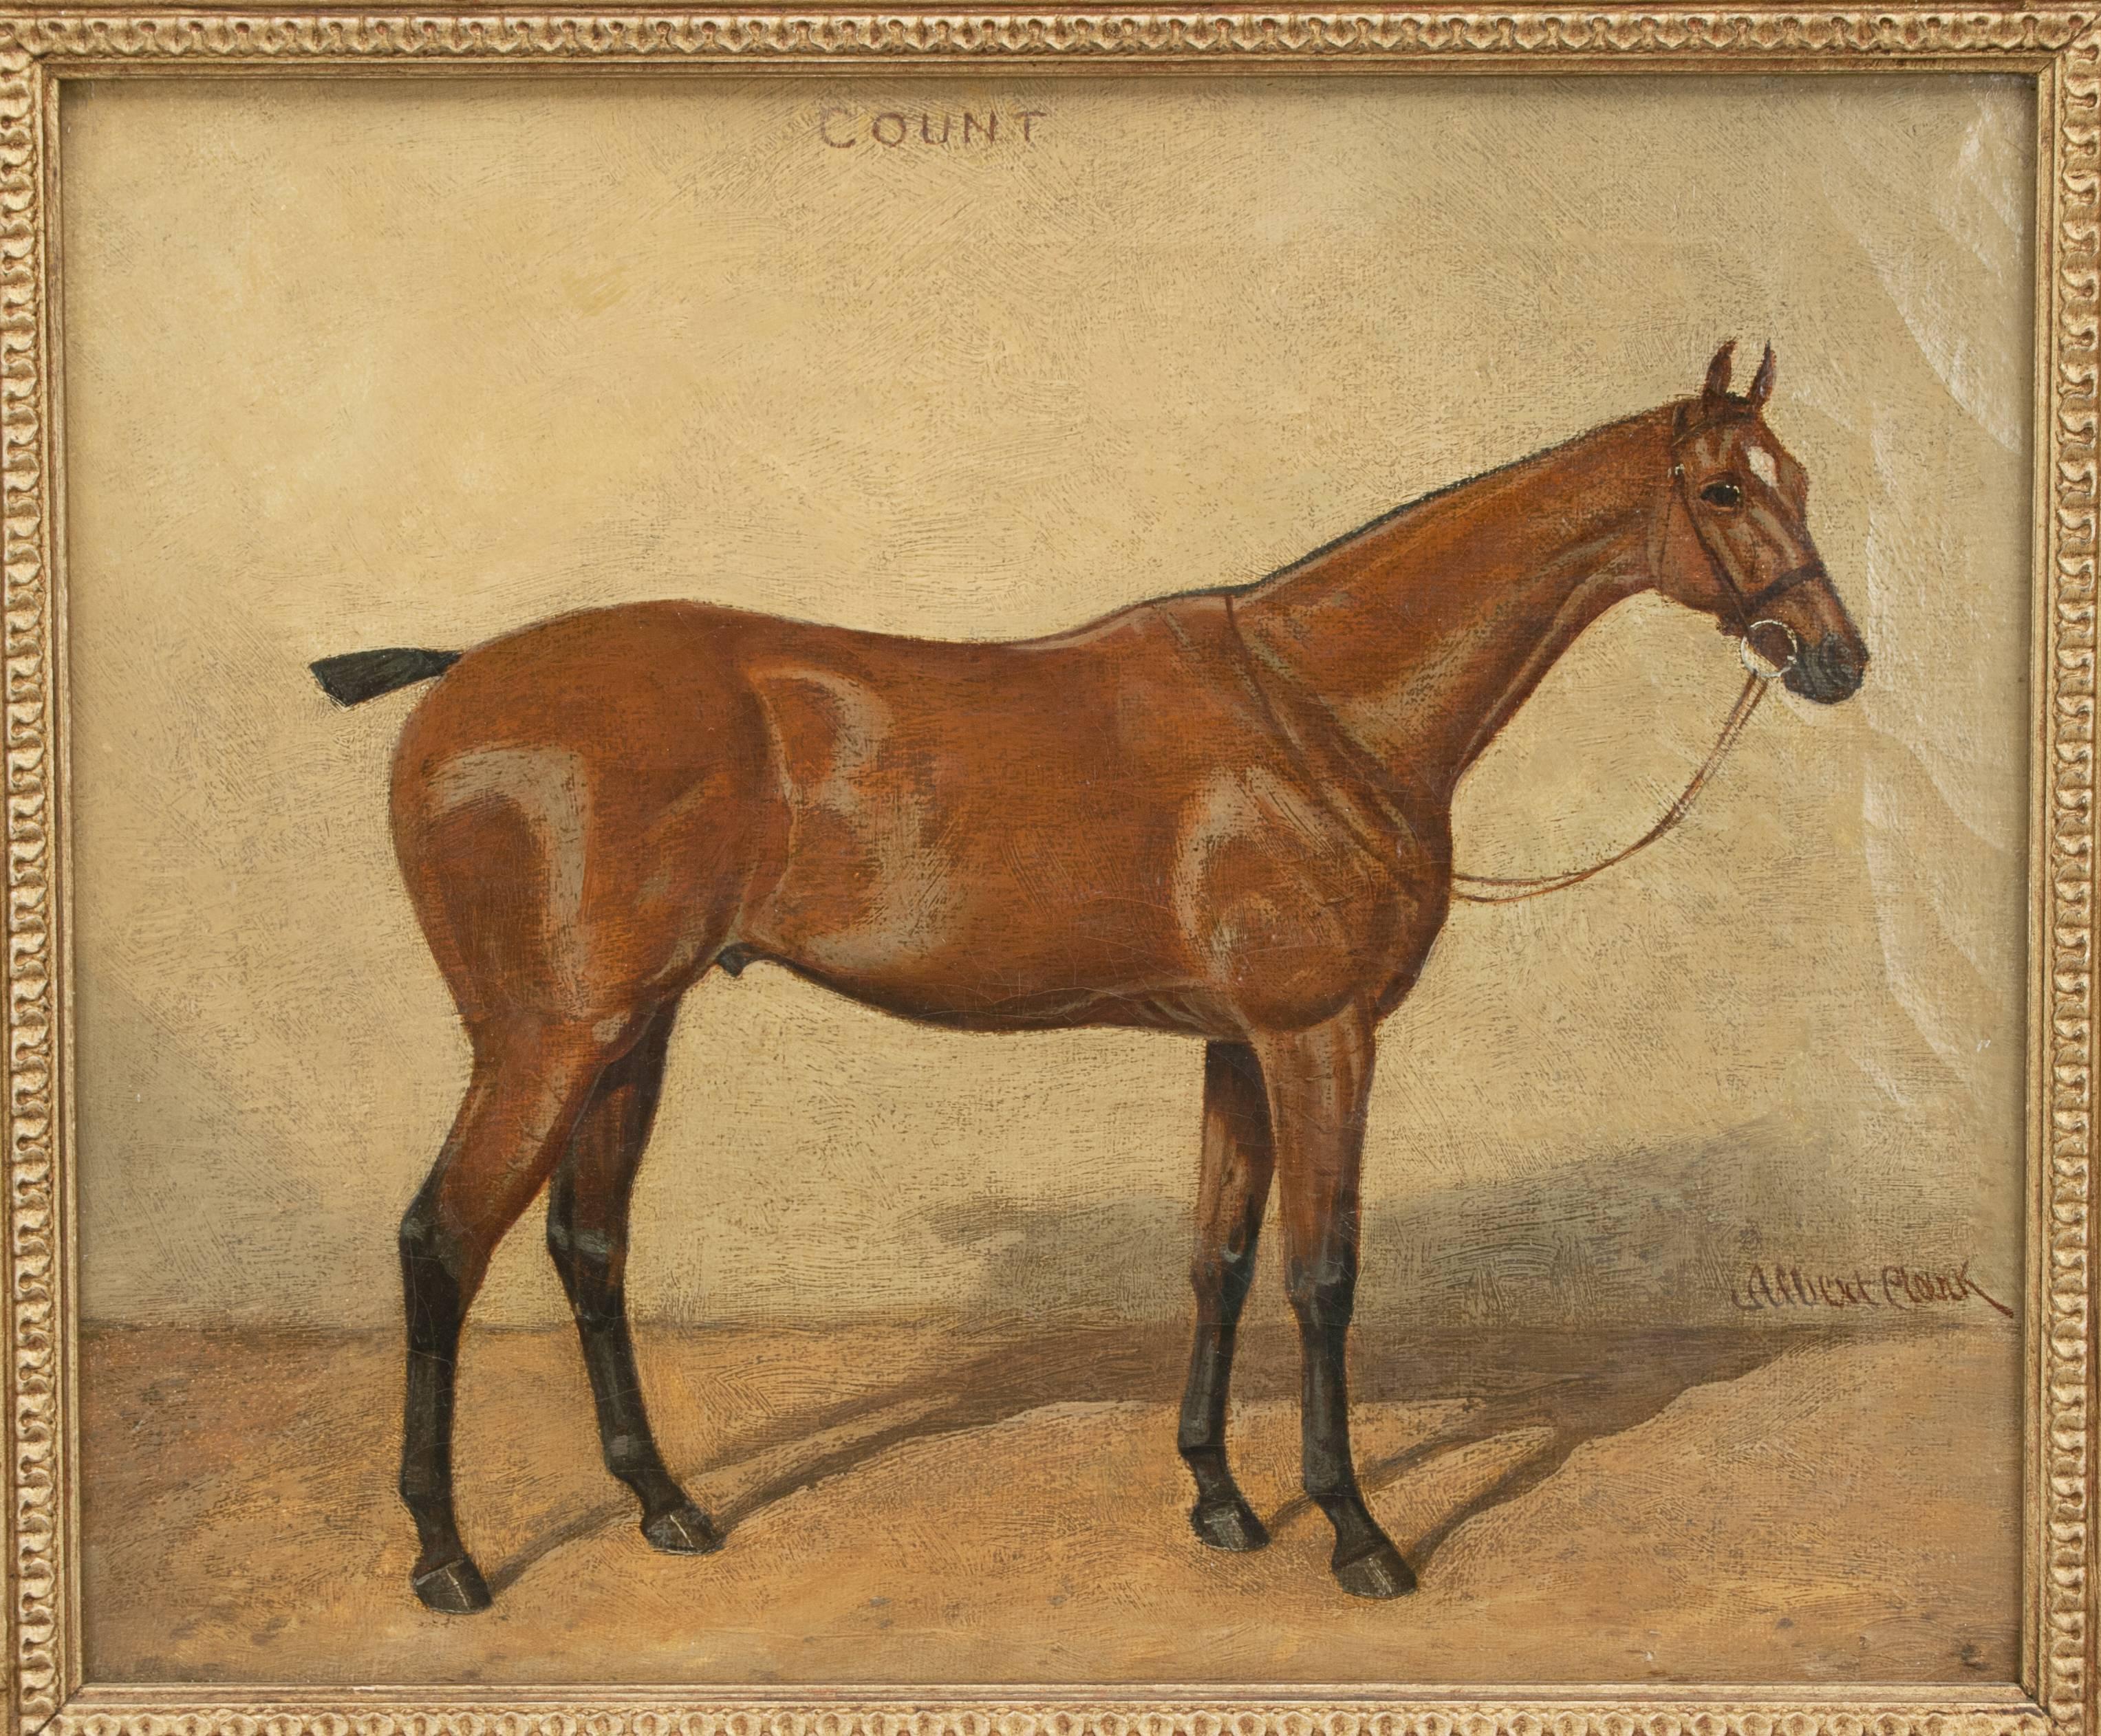 Vintage equestrian oil painting.
A fine oil painting on canvas of a race Horse 'COUNT' in a stable. Painted by Albert Clark. Framed in a new gold frame.

Dimensions: 
H 24.5cm x W 29.5cm
H 9½